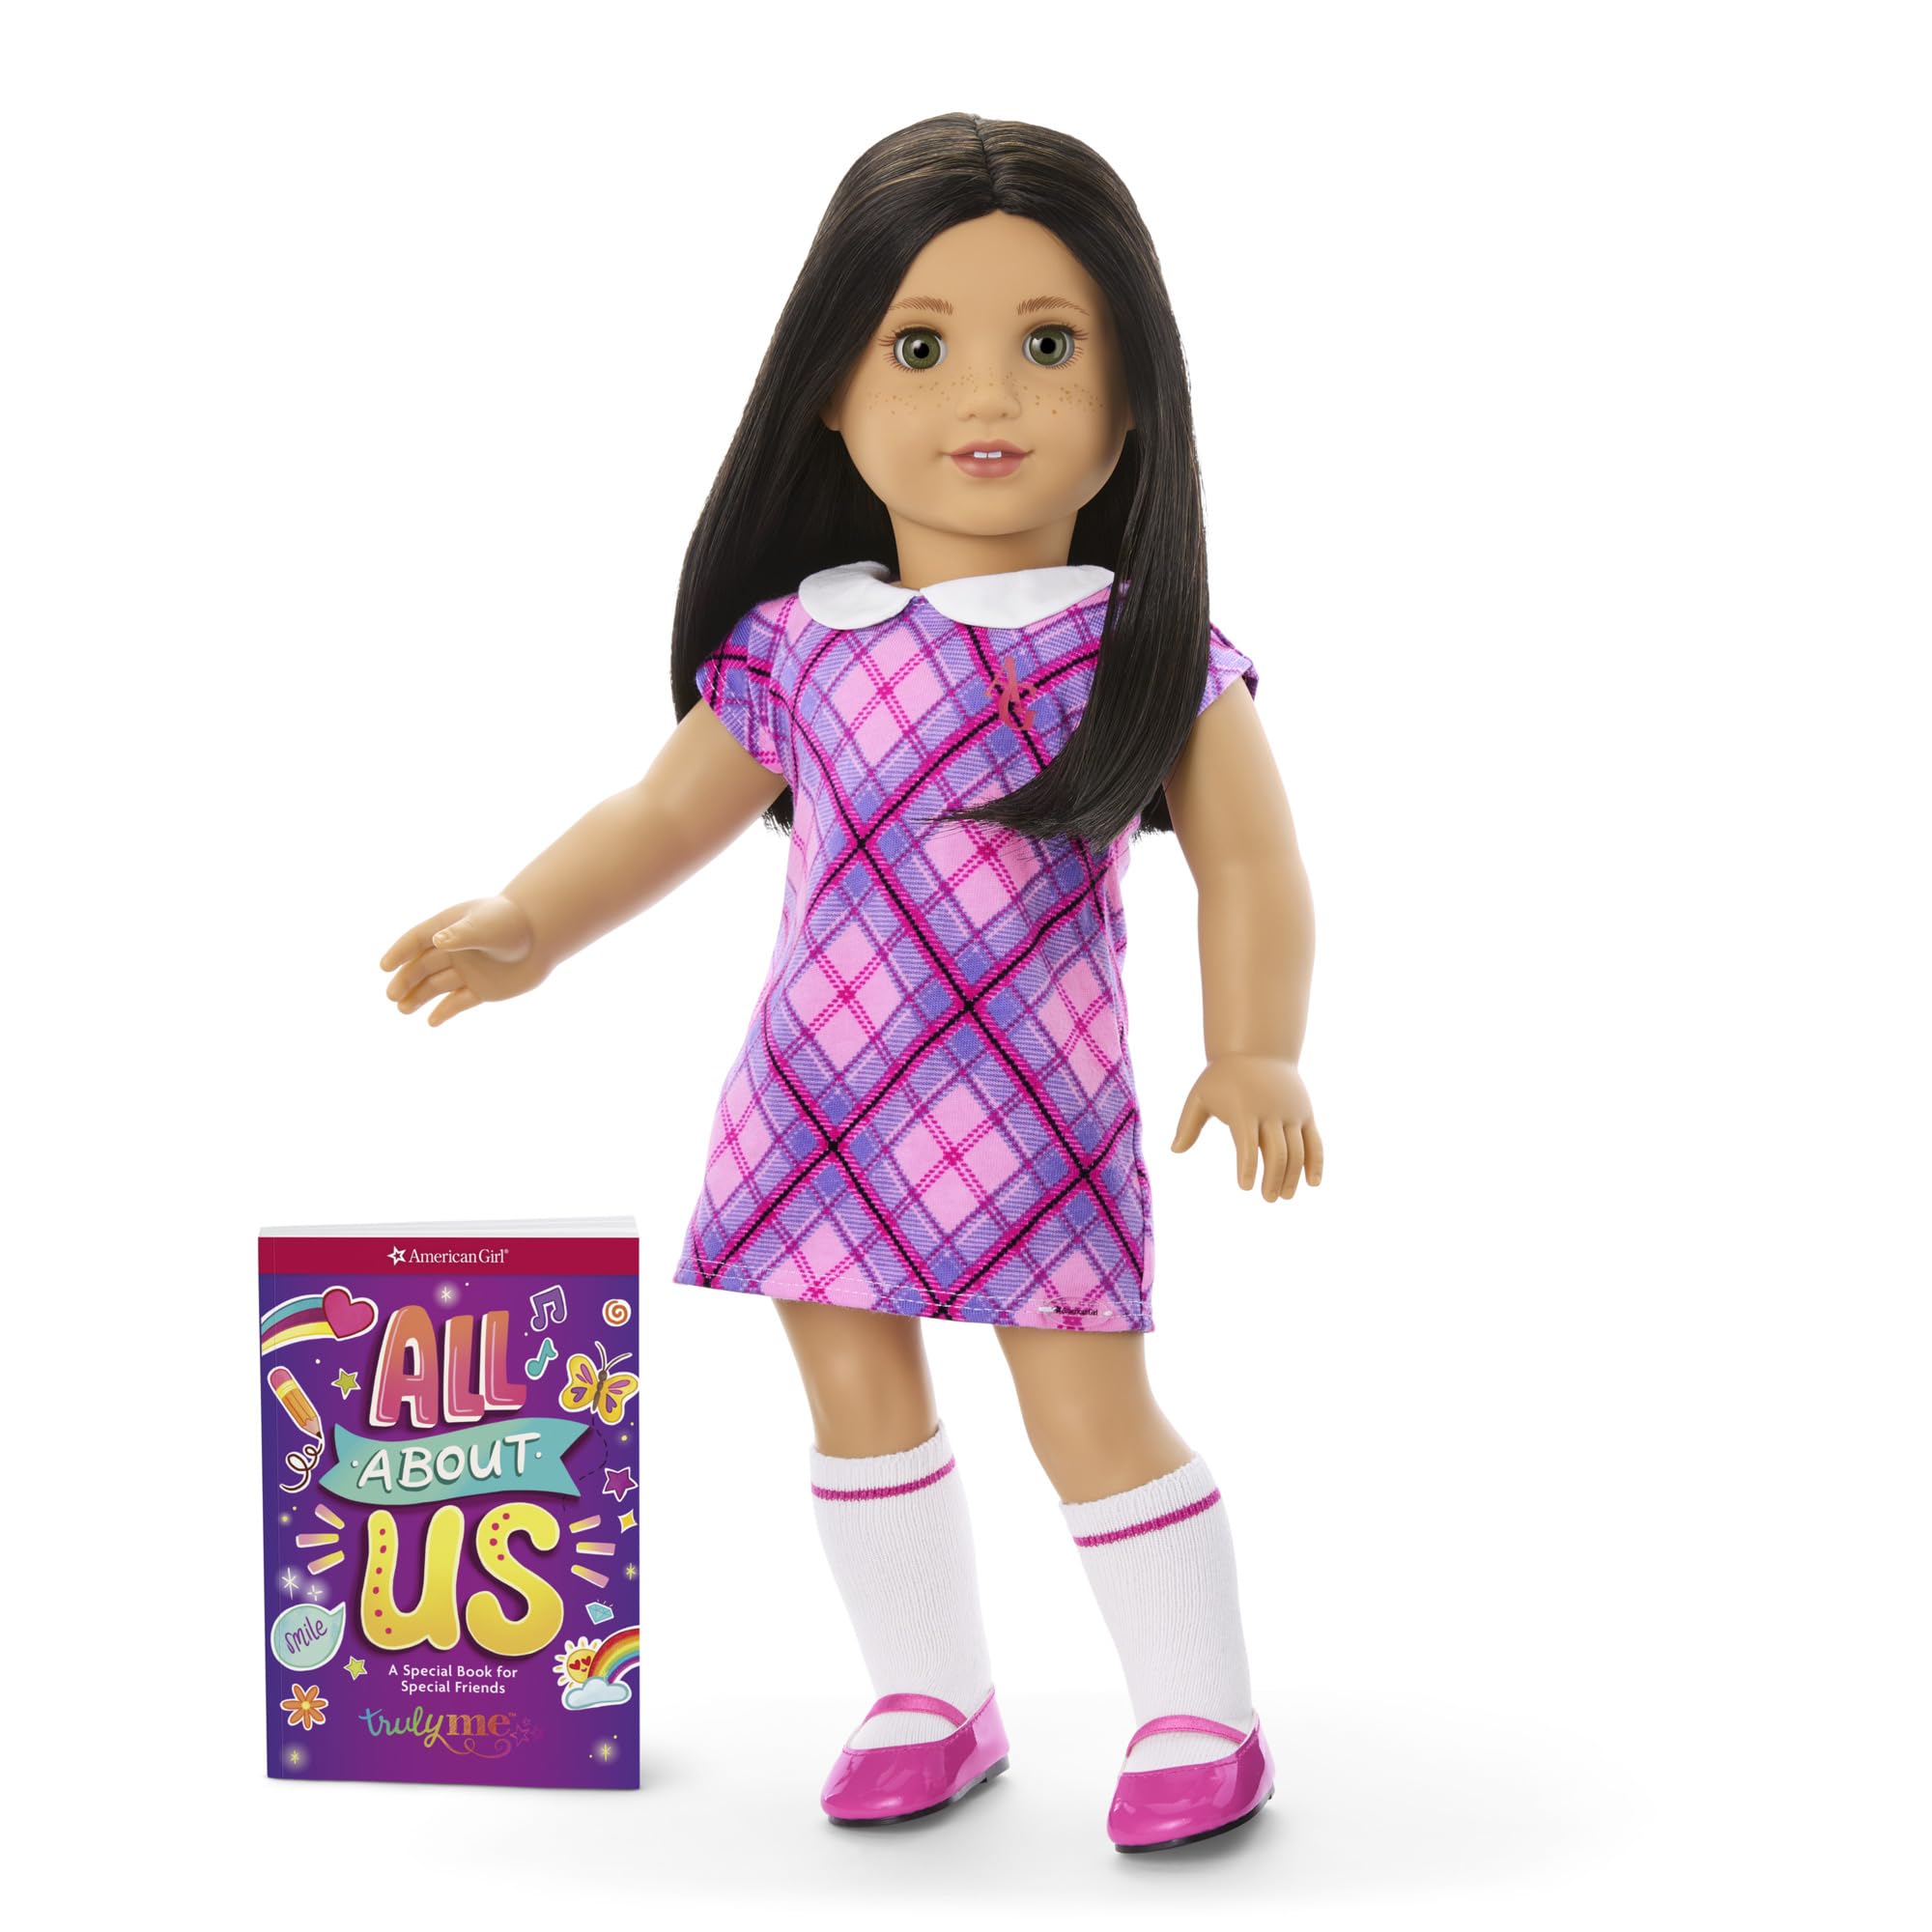 American Girl Truly Me 18-inch Doll #128 w/Green Eyes, Blk-Br Hair, Lt-to-Med Skin & Warm Undertones + Freckles, for Ages 6+